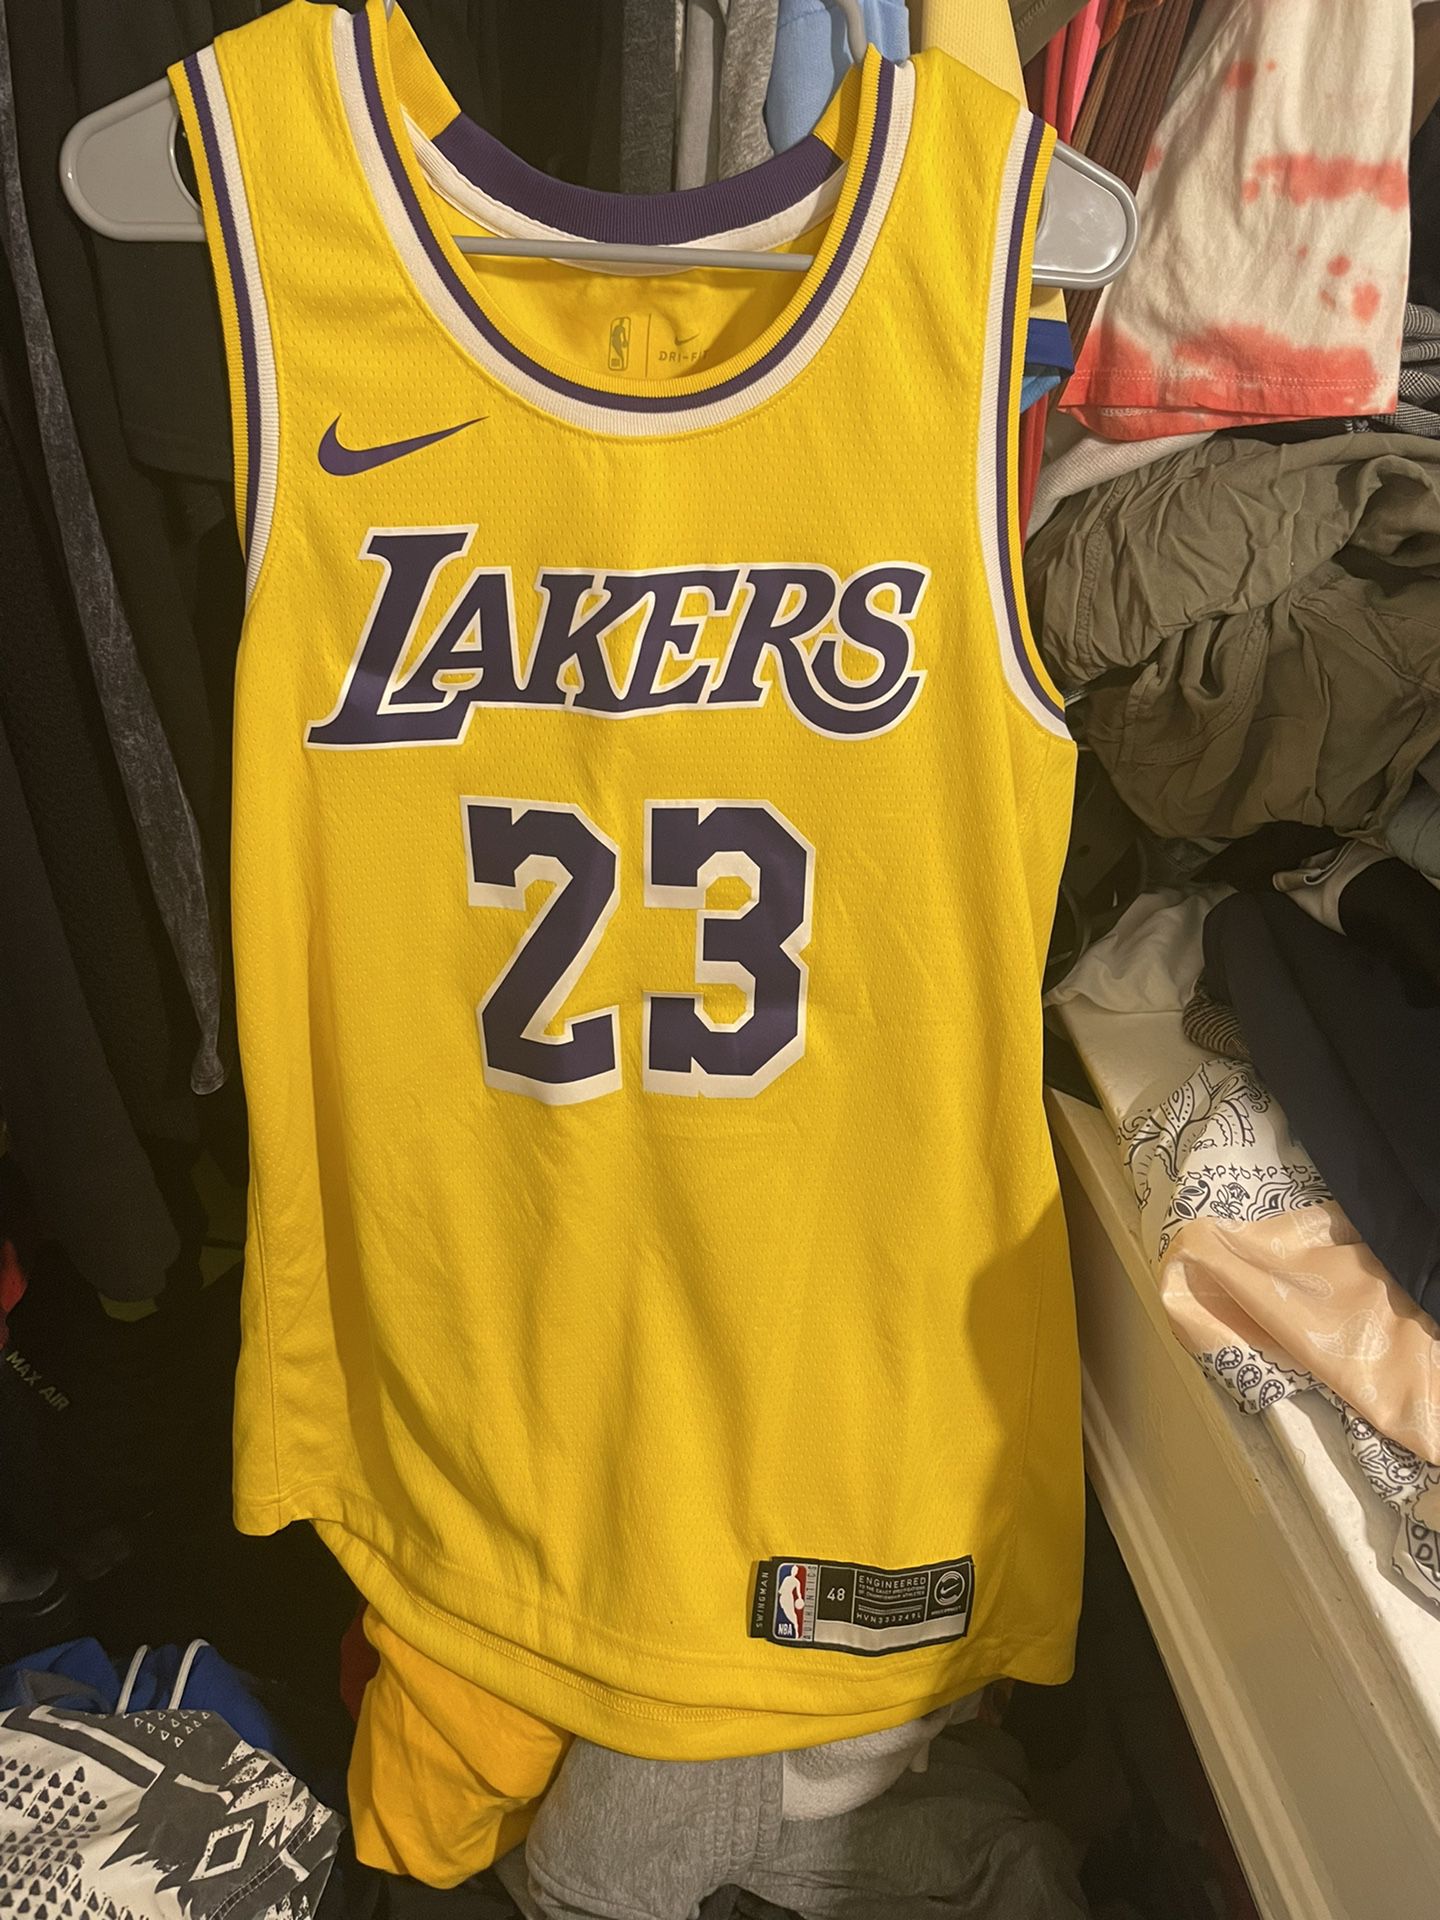 Lebron James lakers jersey for Sale in Chula Vista, CA - OfferUp